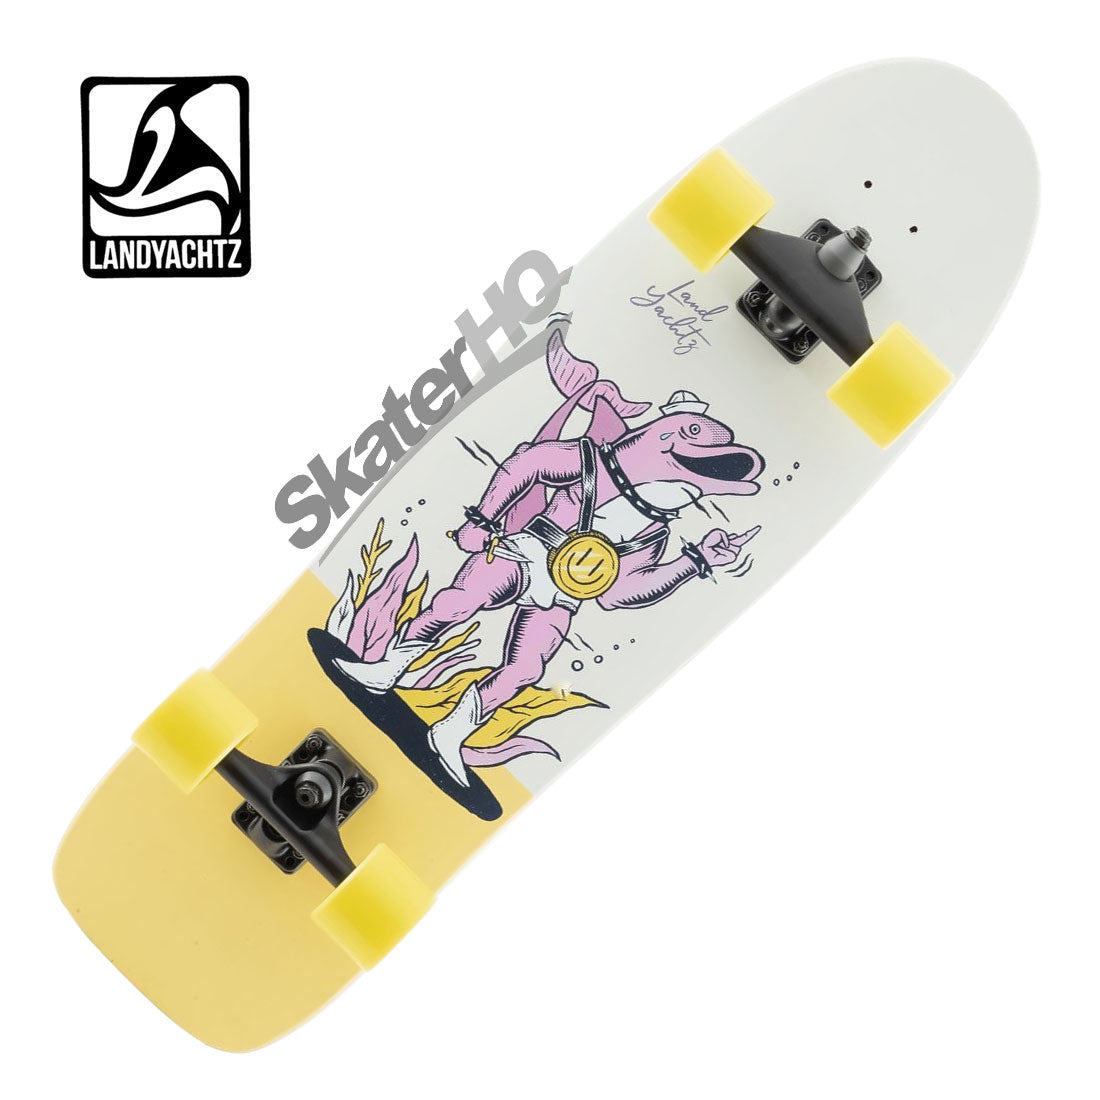 Landyachtz Surf Life Flippy 31.6 Surfskate Complete Skateboard Compl Carving and Specialty